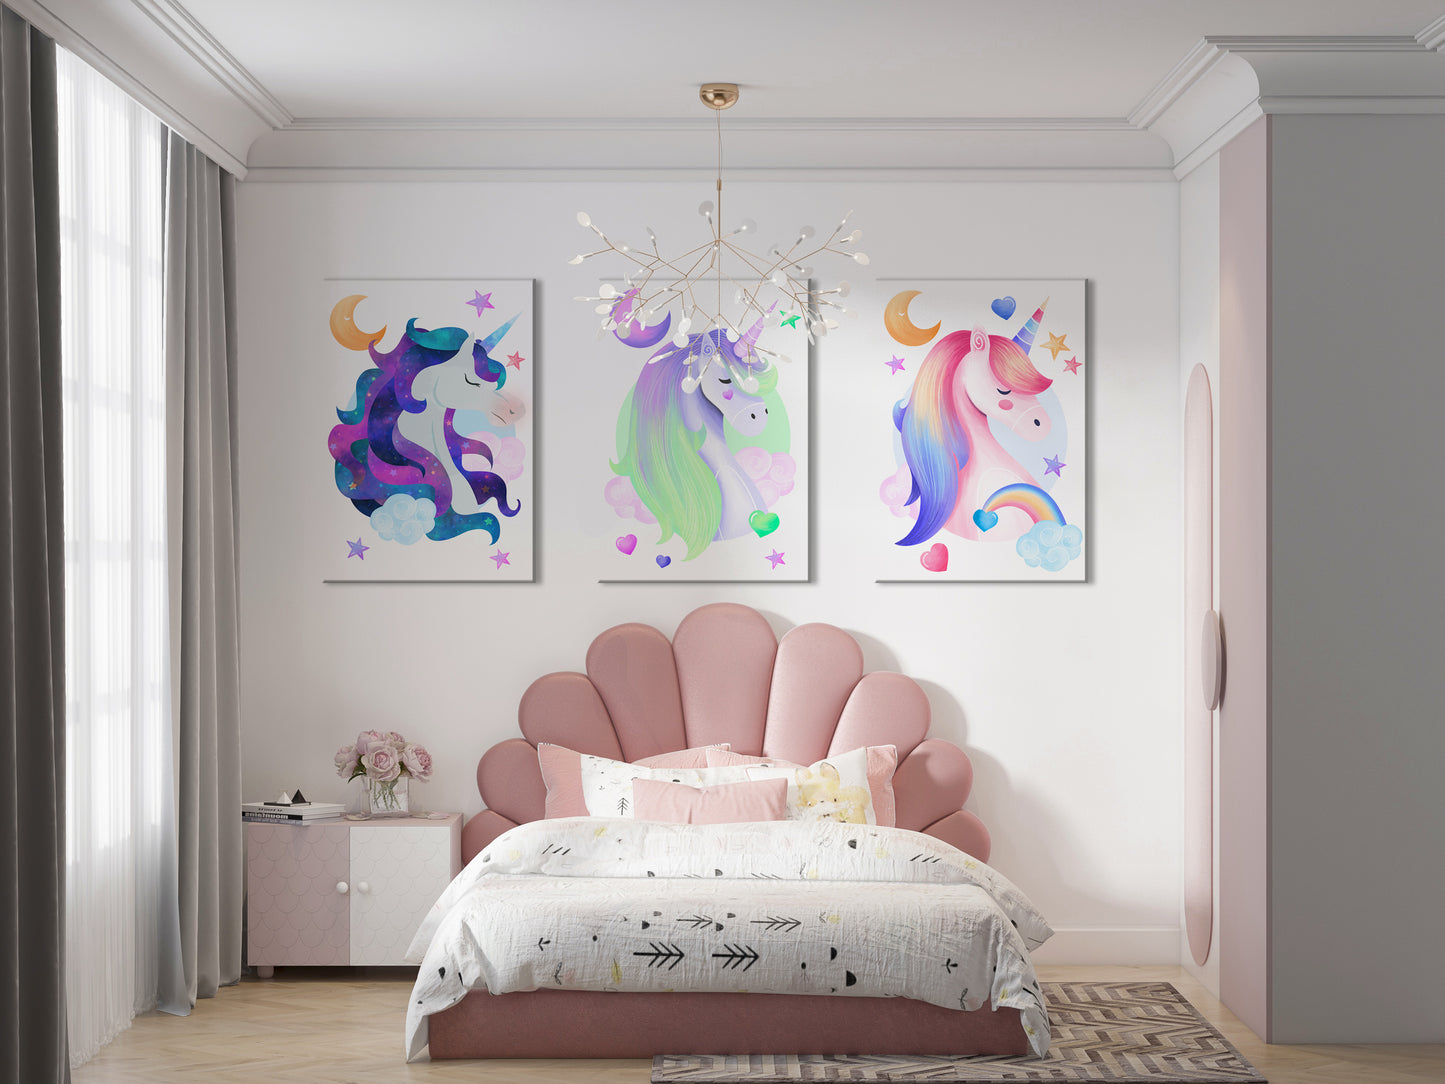 Magical unicorn posters child/baby room - Decoration boy girl -multicolored- Birthday - storytelling and magic - 3 posters A4 A3 print